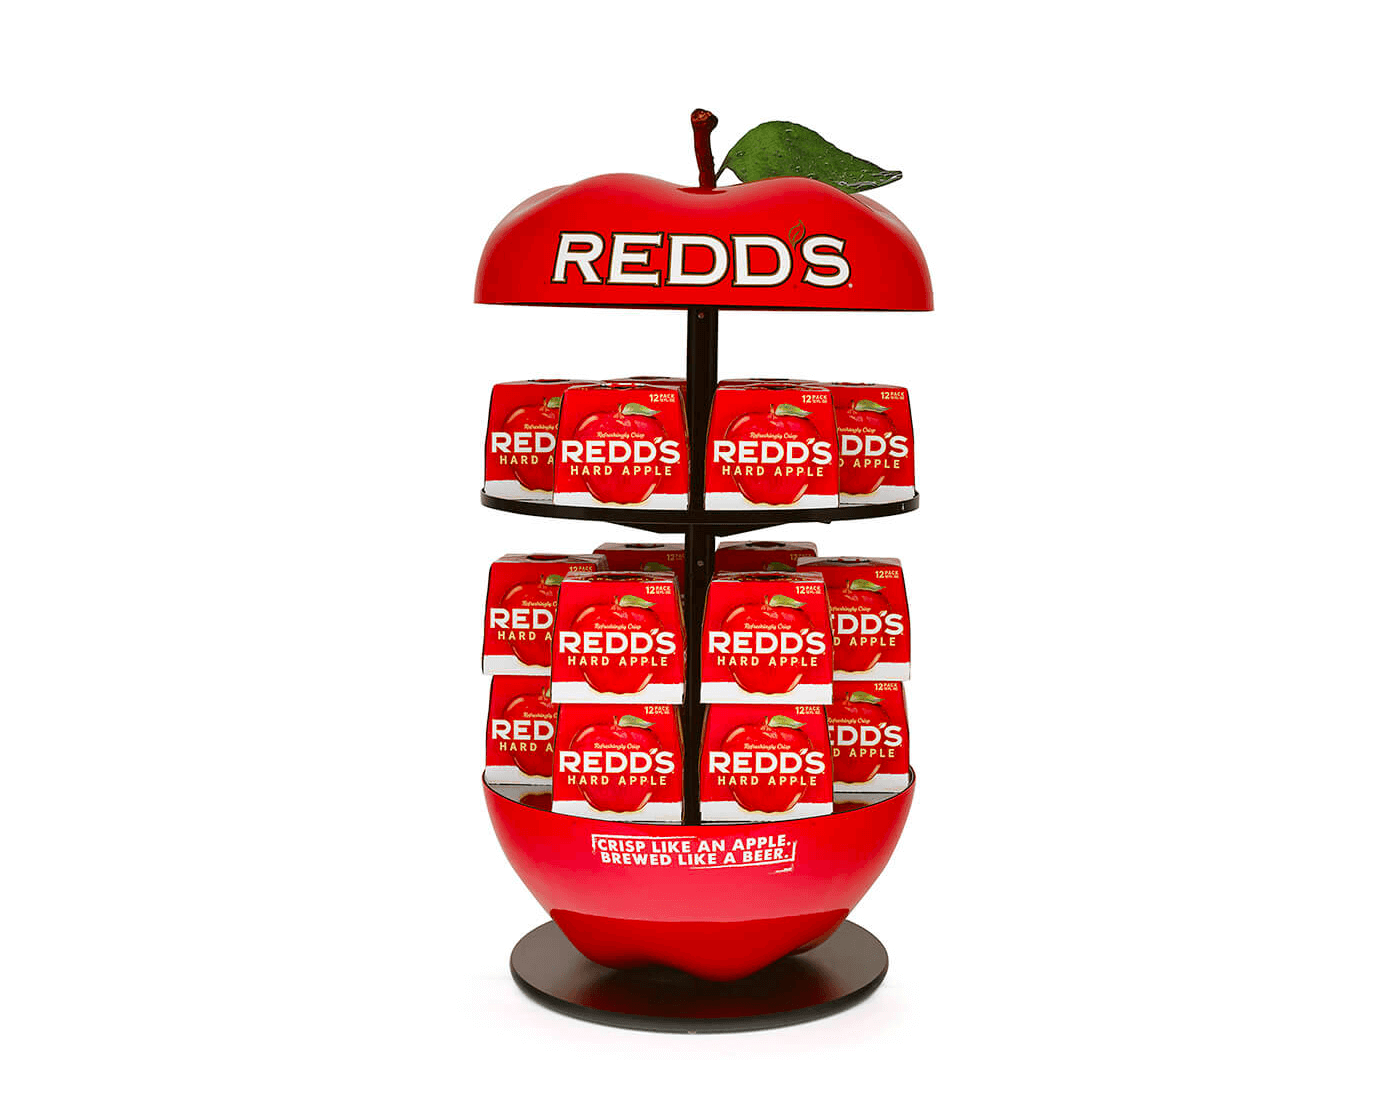 A display for Redd's Apples